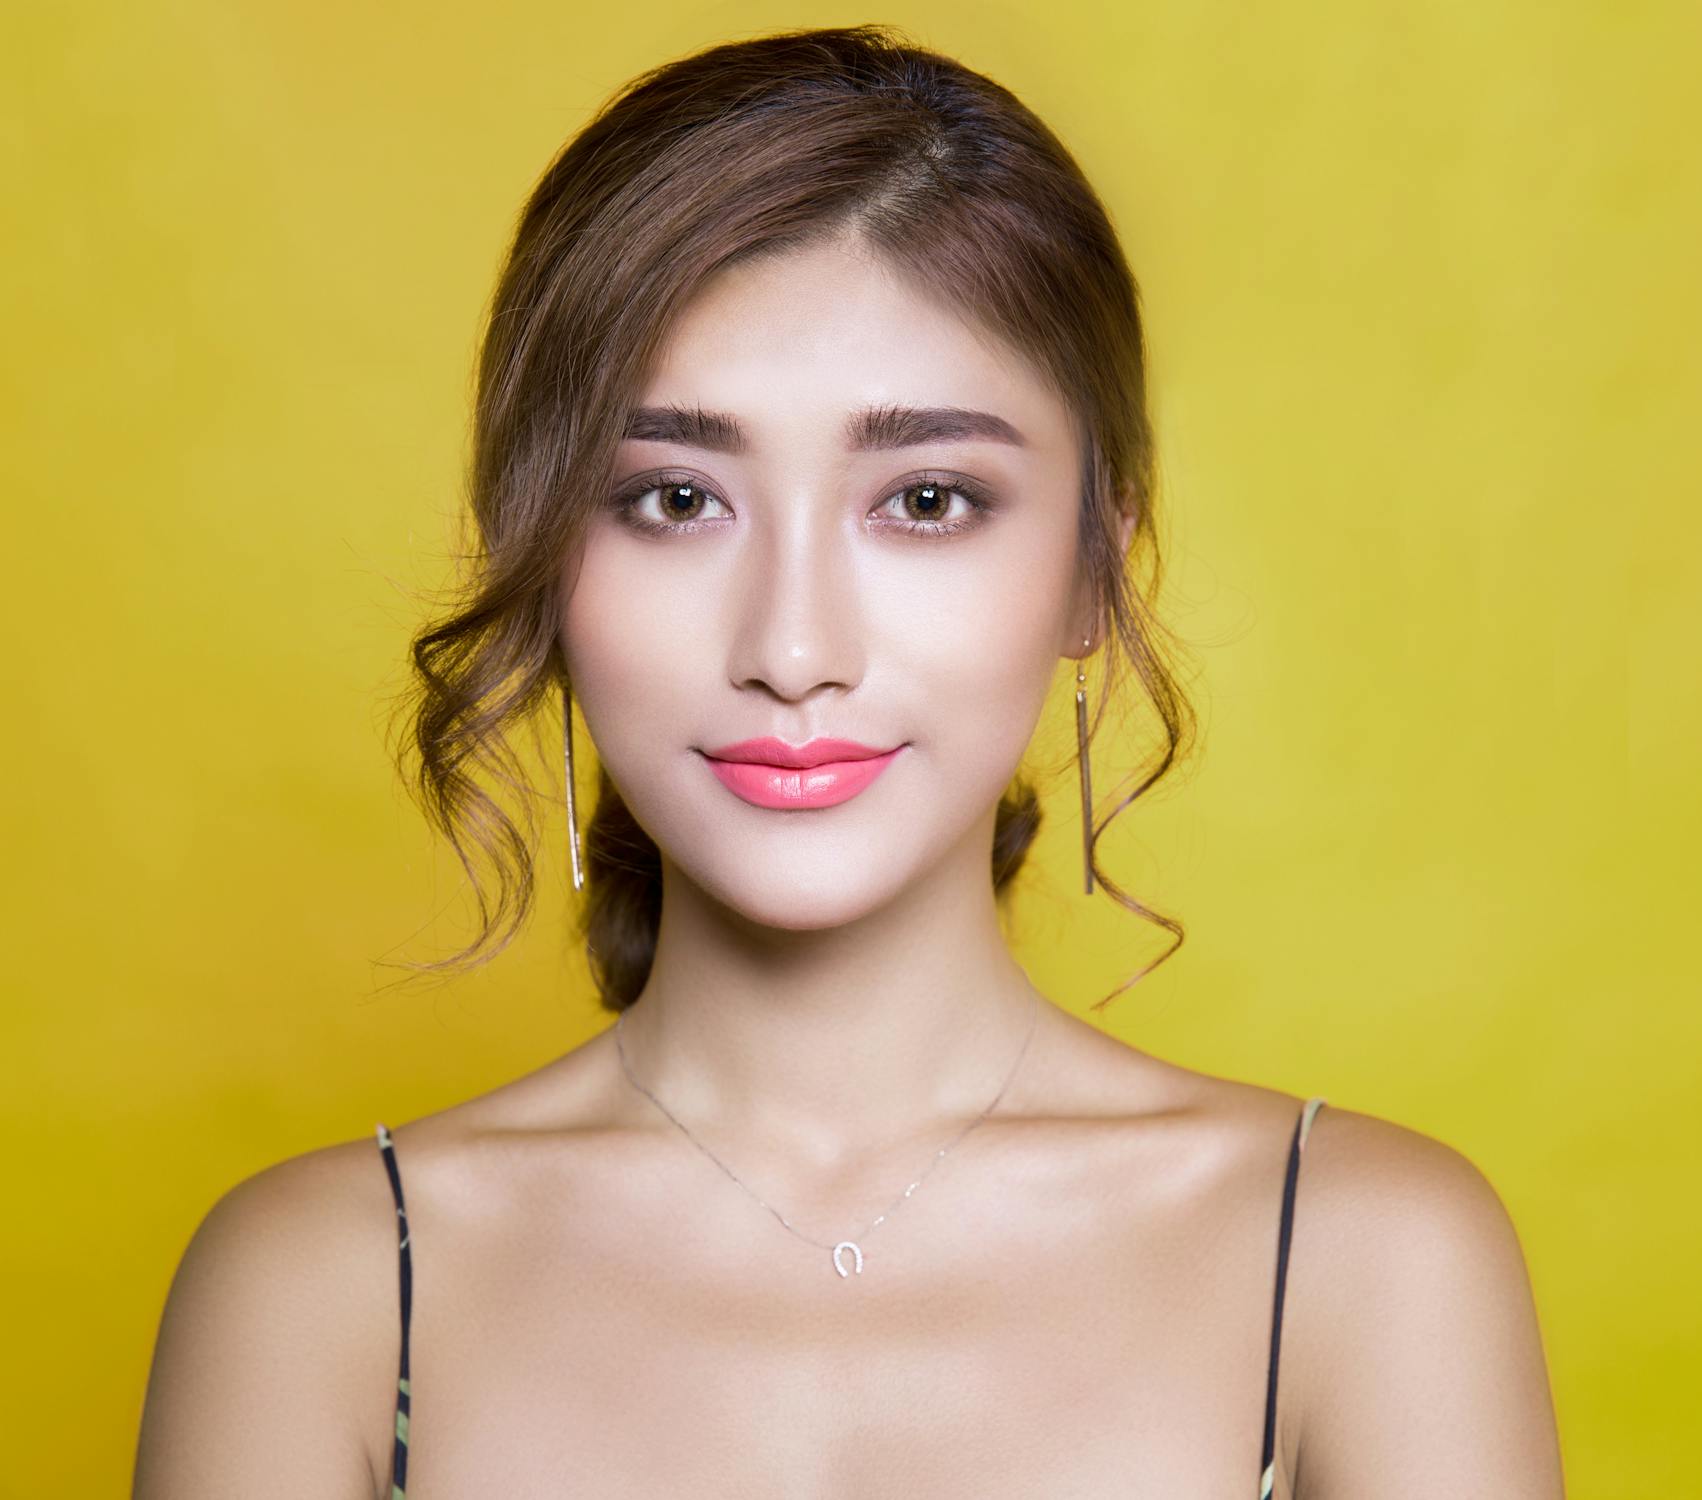 7 Tips for Beautiful Lips Photo by Pixabay from Pexels: https://www.pexels.com/photo/woman-wearing-black-spaghetti-strap-top-415829/